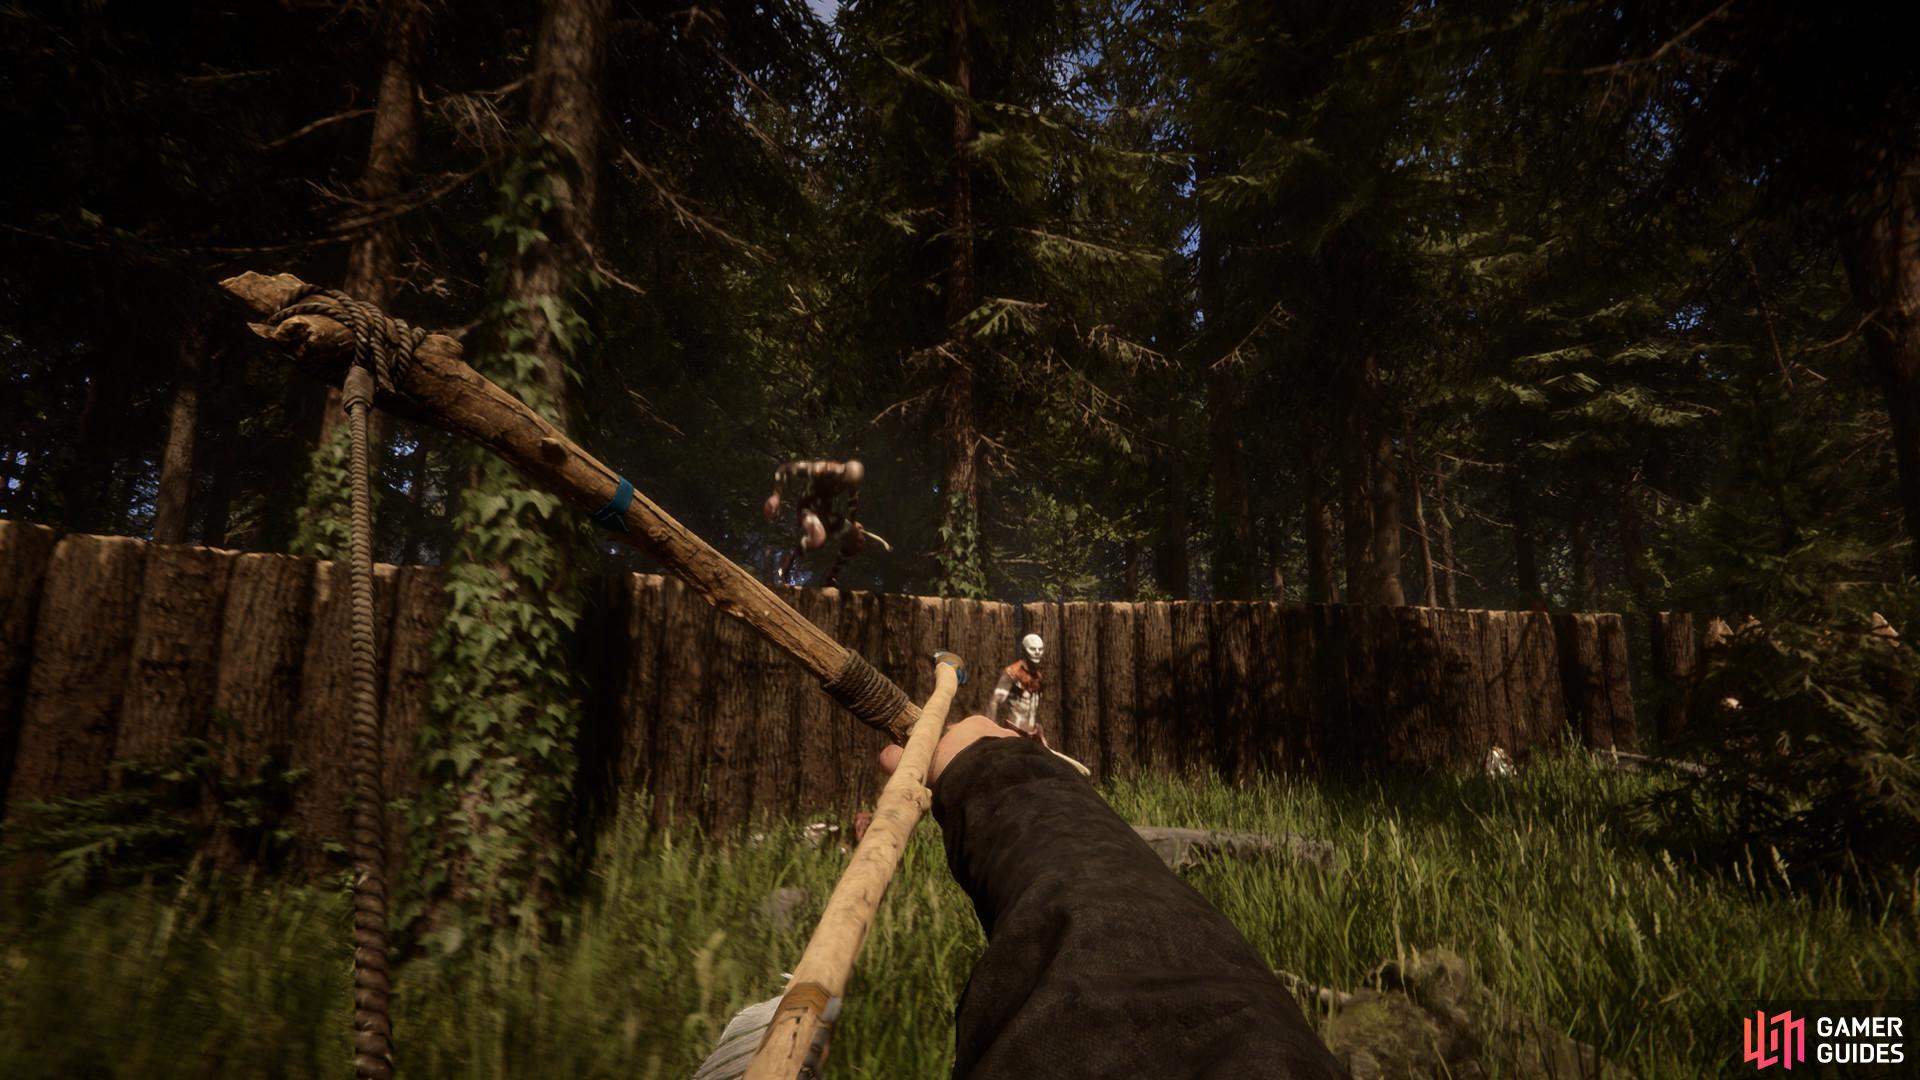 Sons of the Forest system requirements, PC performance and the best  settings to use